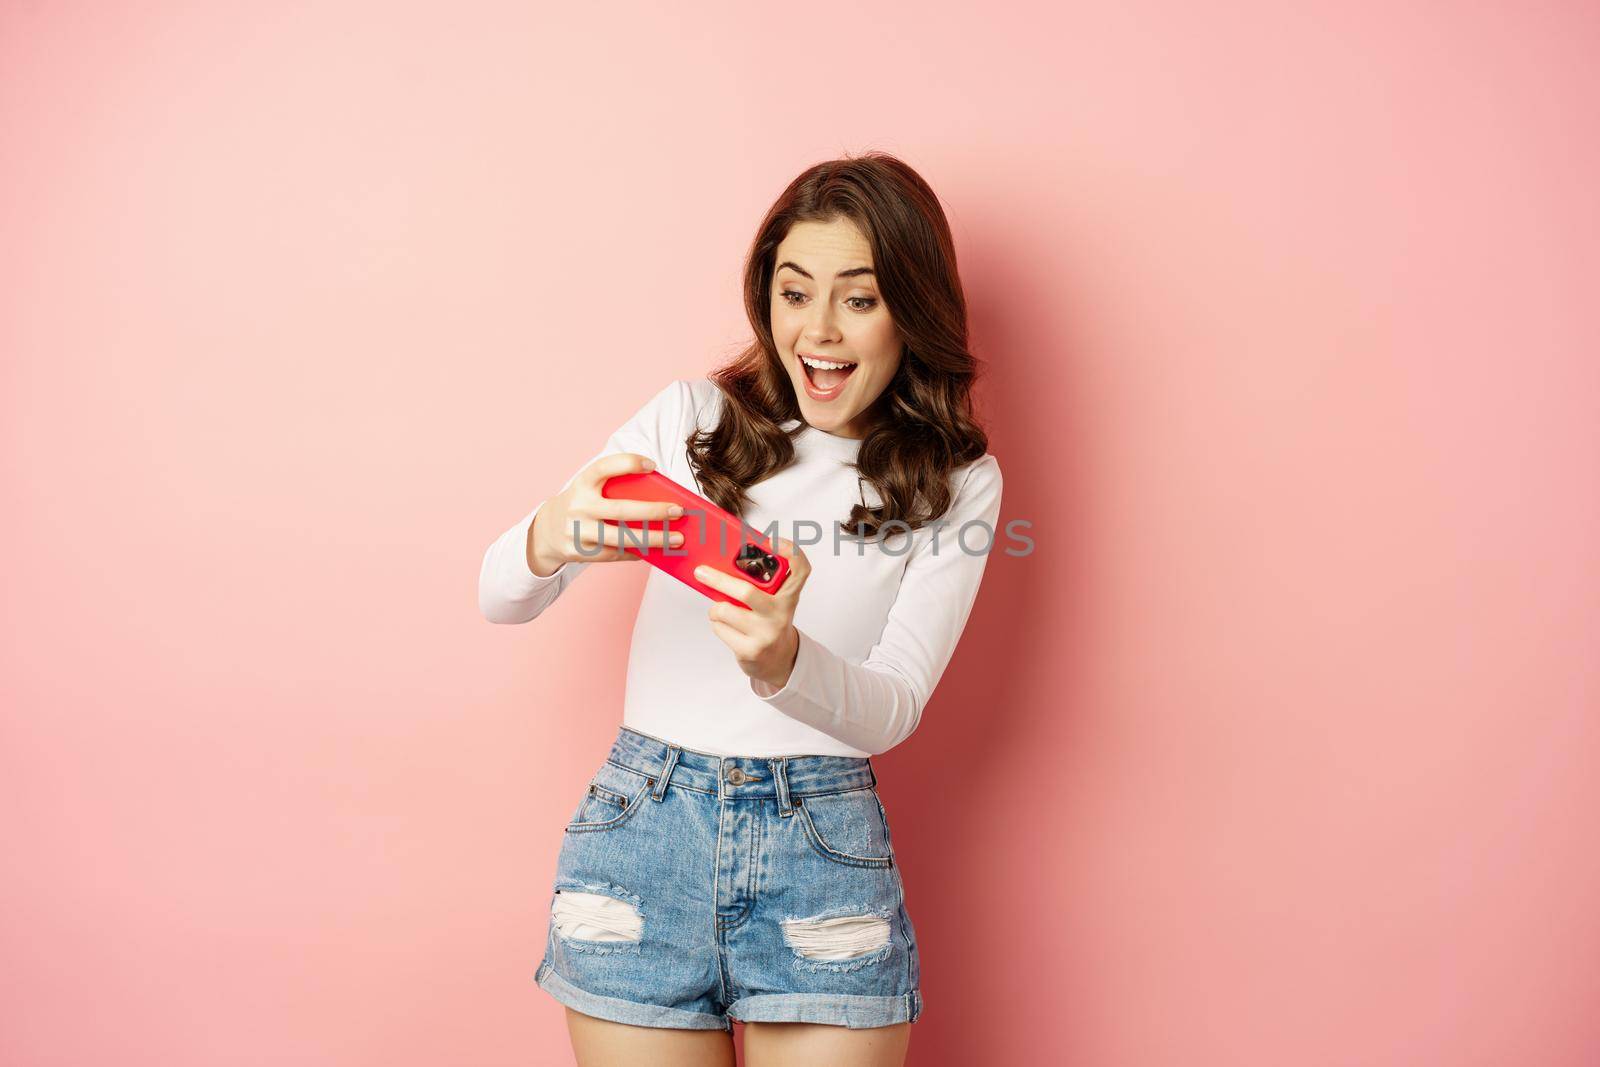 Happy beautiful girl playing mobile video game, holding smartphone horizontally, watching on cellphone with excited face, pink background.